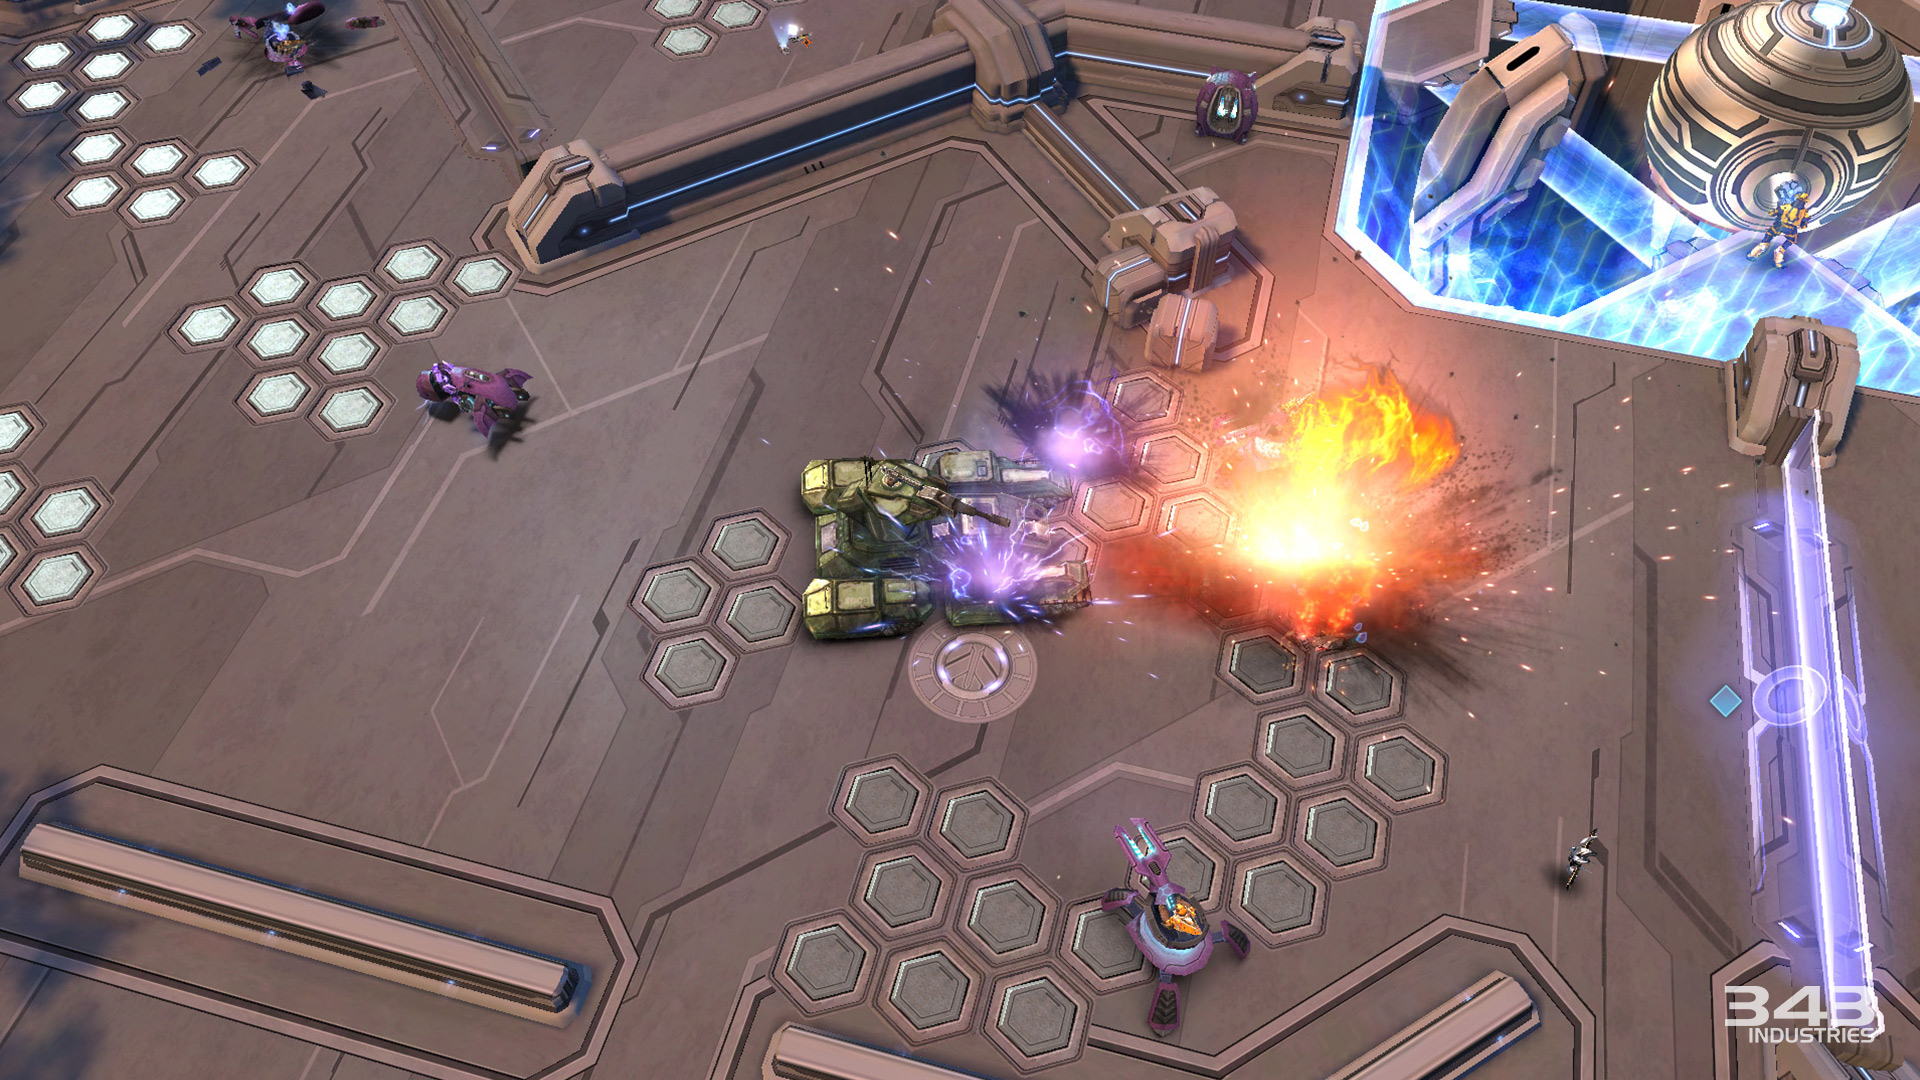 Halo: Spartan Strike | Games | Halo - Official Site